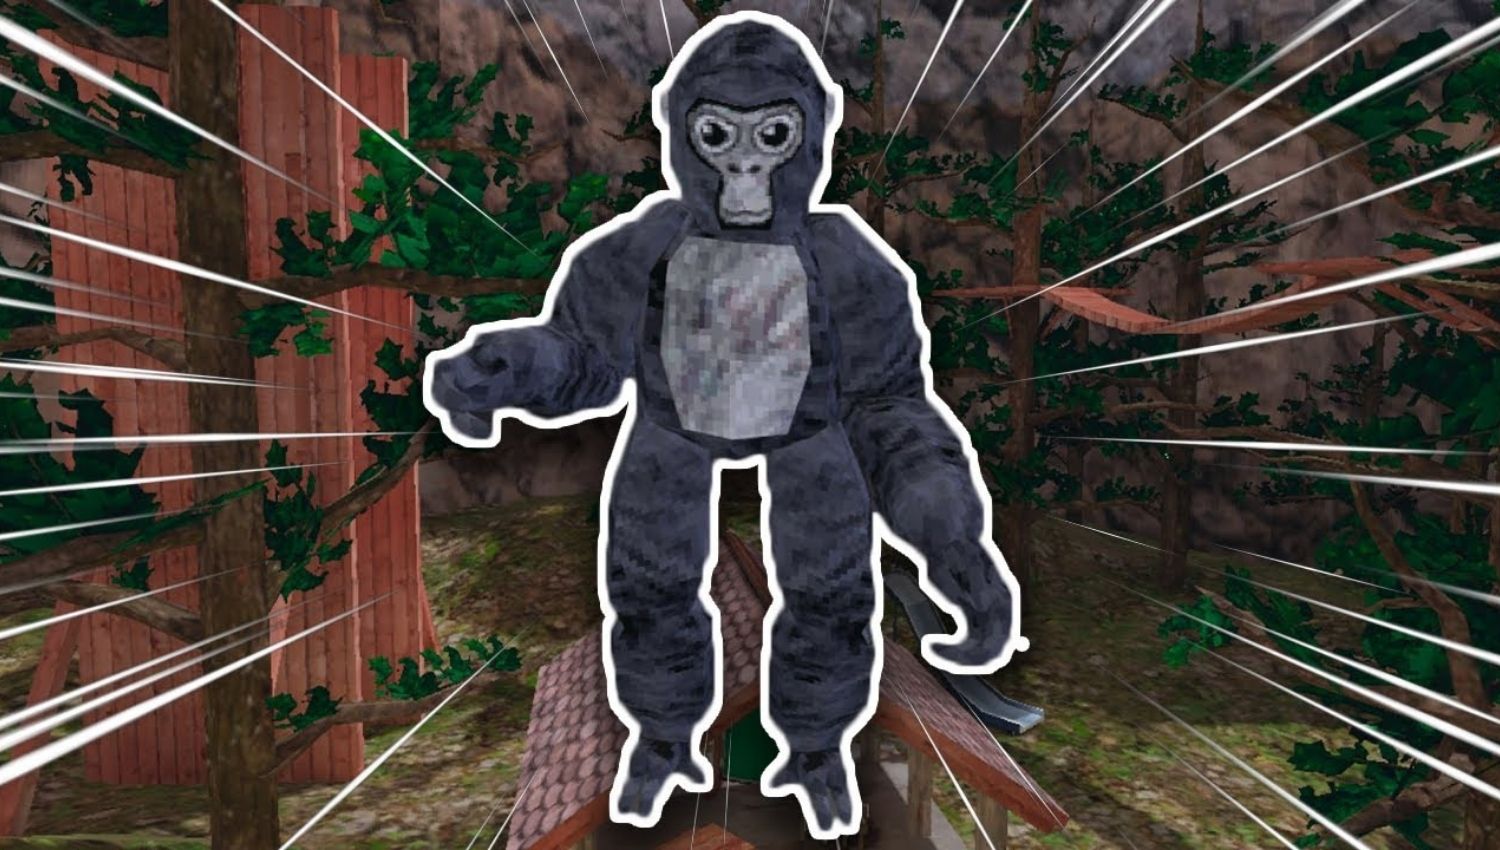 Download Gorilla Tag 2: The Monke Games APK 0.4.1 for Android 